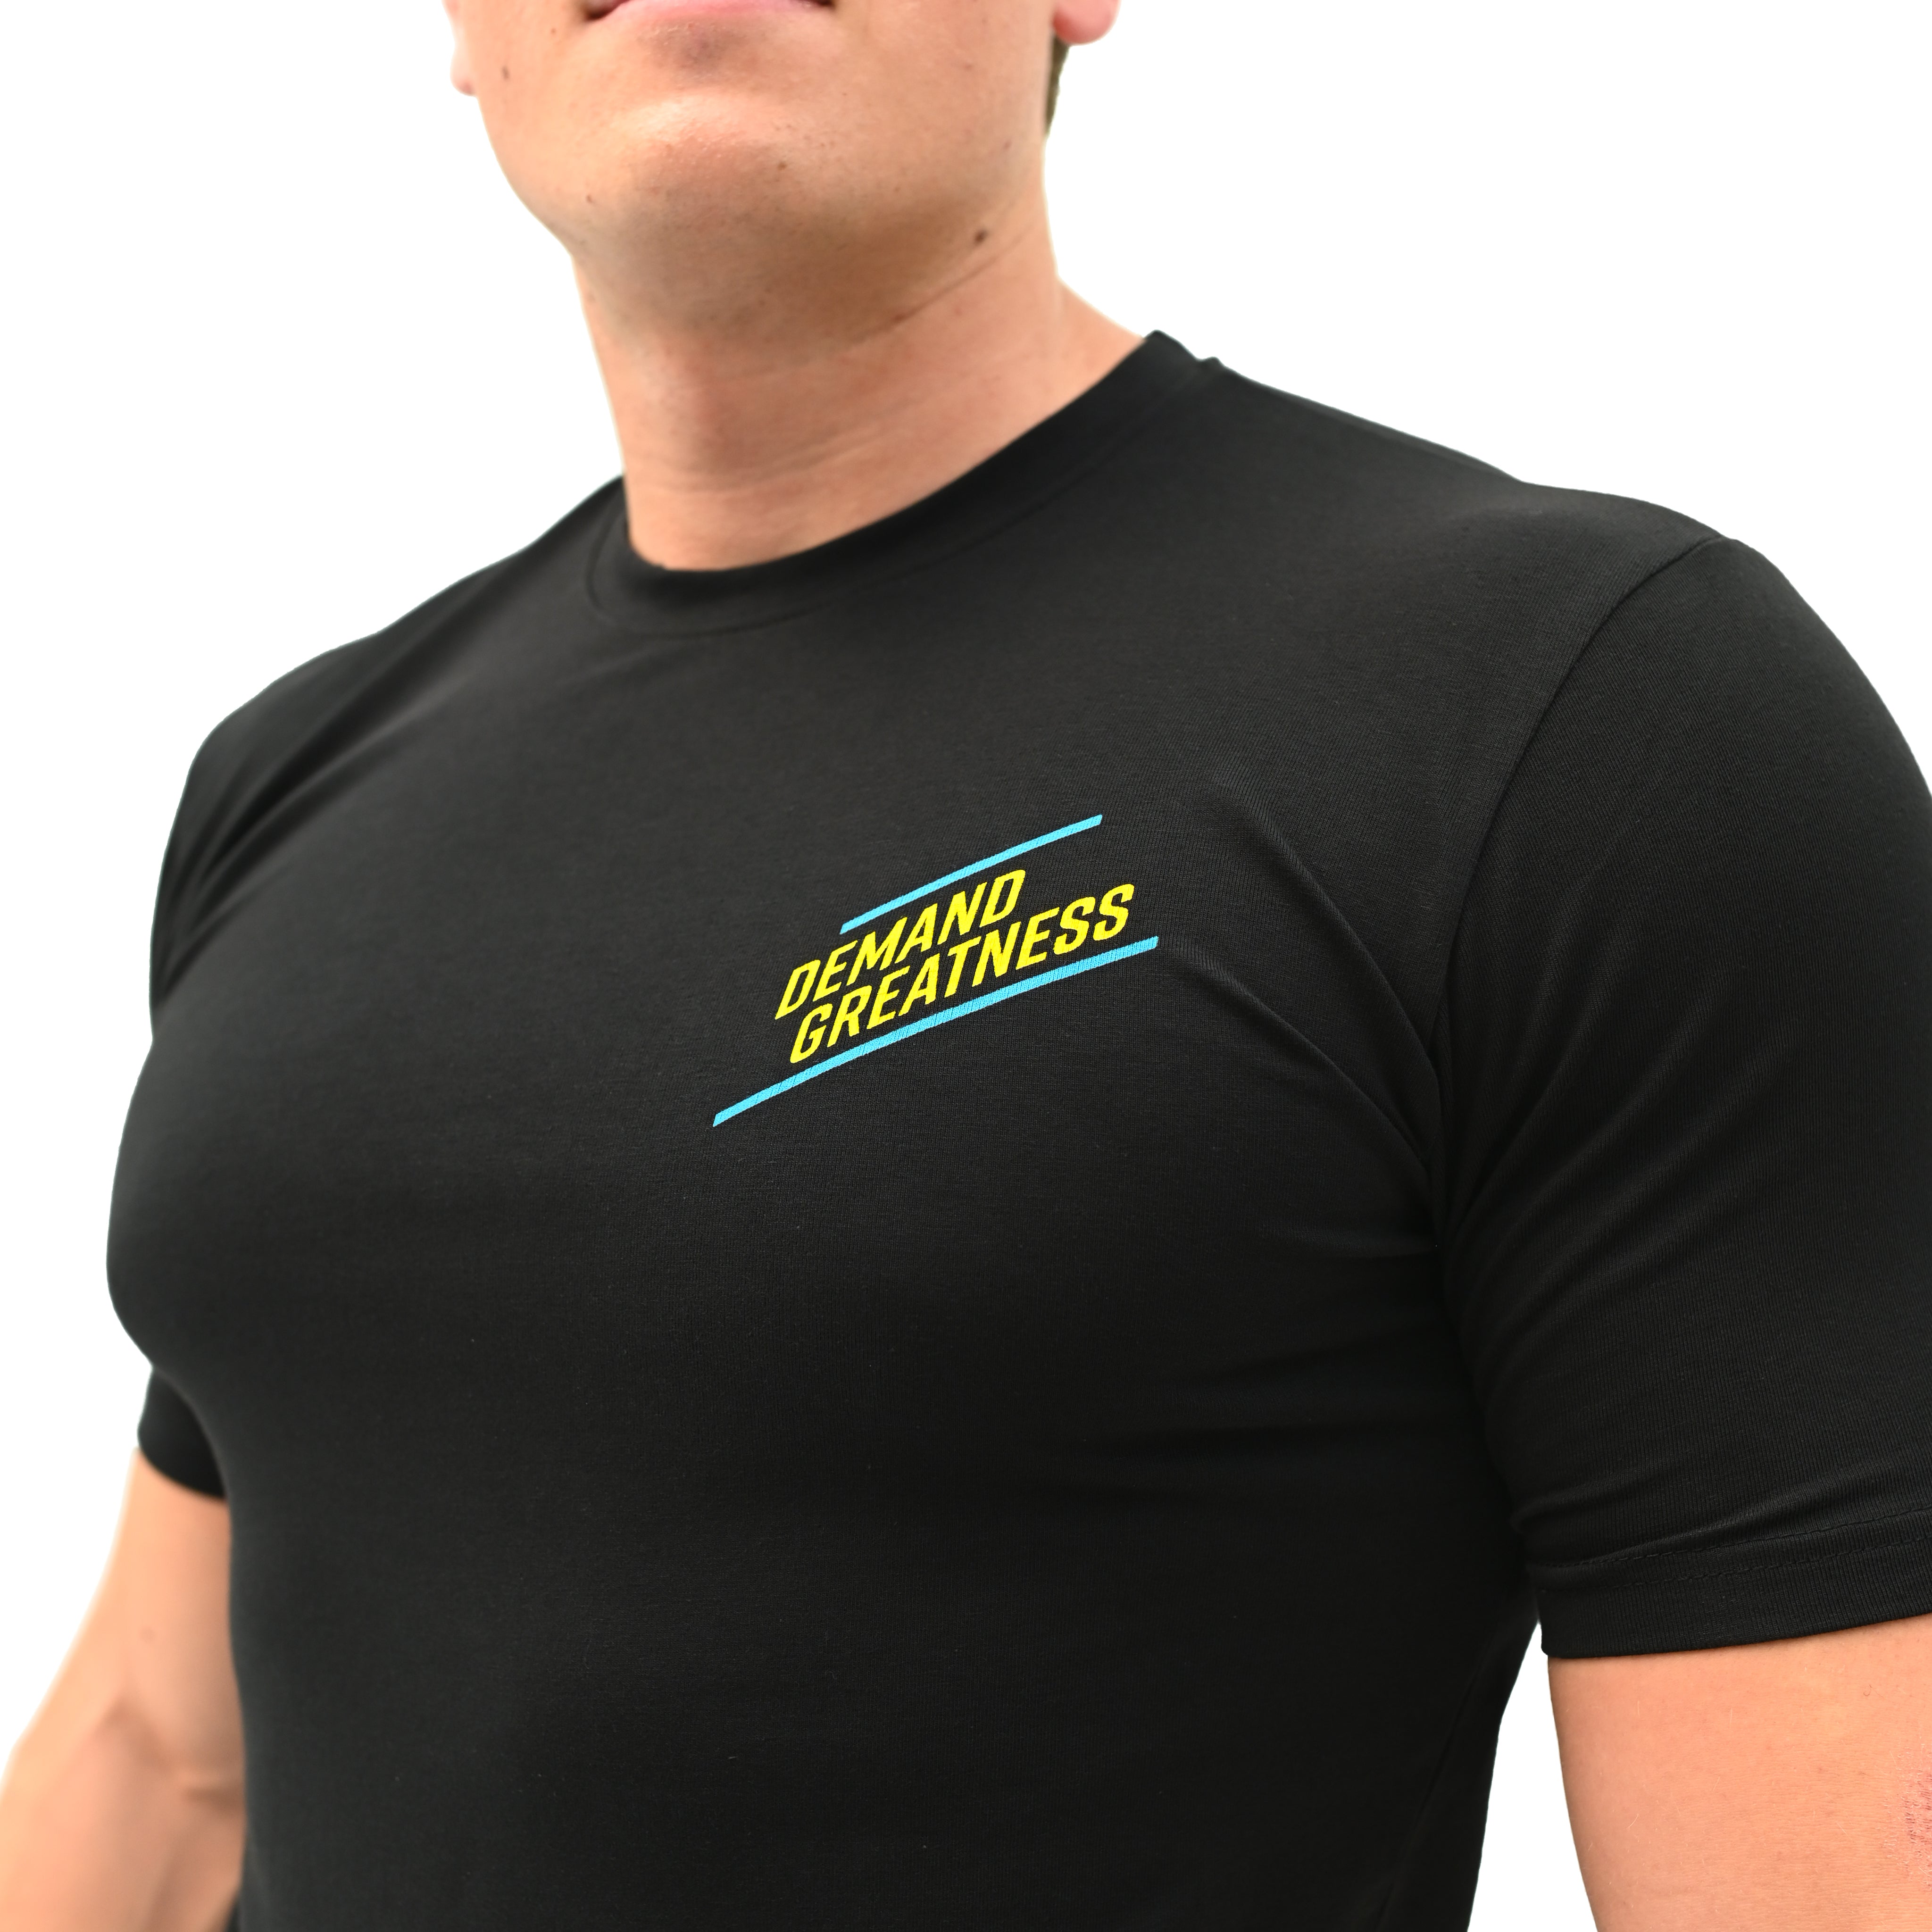 Geo Weave Non Bar Grip T-Shirt is perfect for in and out of the gym. Purchase Geo Weave Non Bar Grip tshirt UK from A7 UK. Purchase Geo Weave Shirt Europe from A7 UK. Best gymwear shipping to UK and Europe from A7 UK. Geo Weave is our newest Non Bar Grip Design. The best Powerlifting apparel for all your workouts. Available in UK and Europe including France, Italy, Germany, Sweden and Poland.